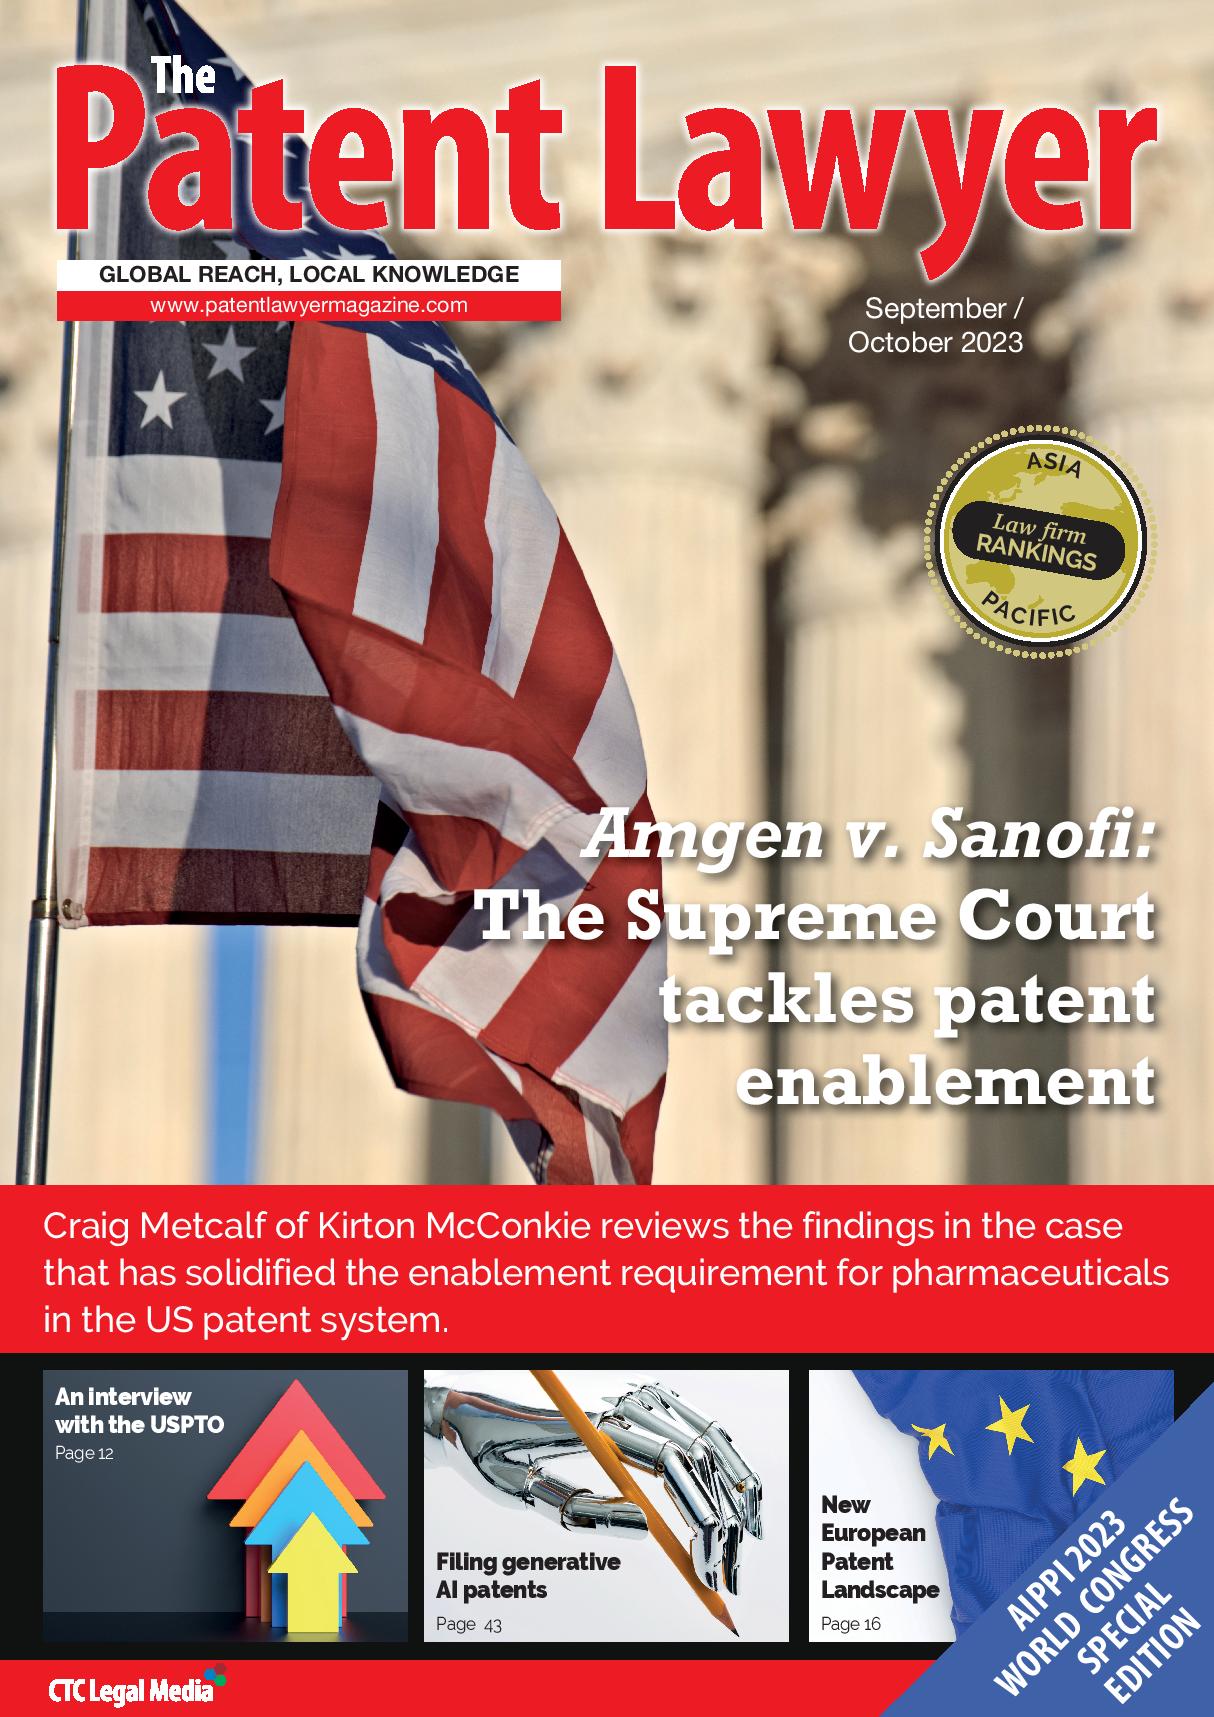 The Patent Lawyer Sept/Oct 2023